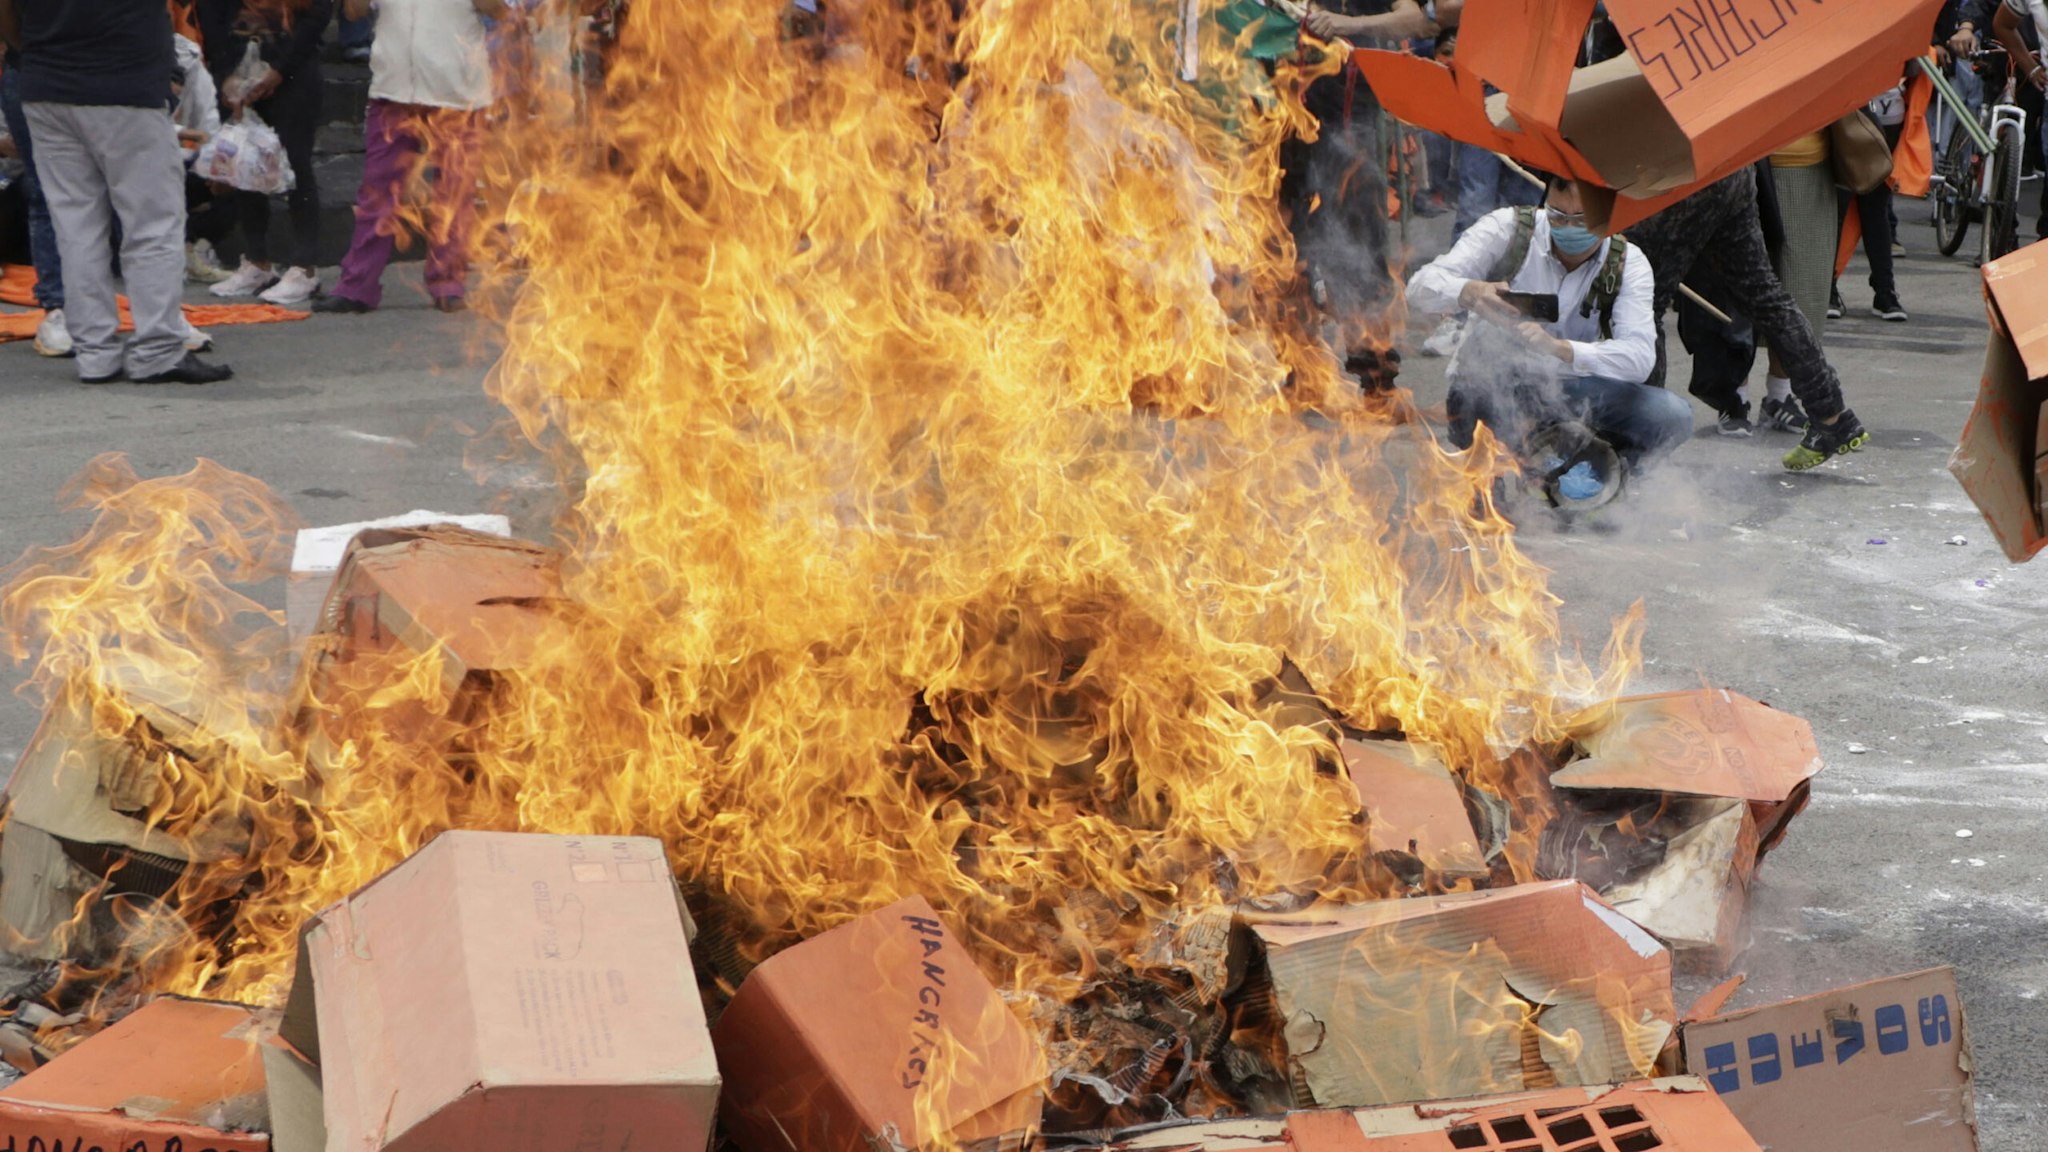 Protesters set fire to cardboard boxes simulating houses of the Housing Institute of the capital, to demand justice and attention to people who were allegedly defrauded by shell companies and local authorities to process a loan for housing in the Hangares area through this institute. On September 10, 2020 in Mexico City, Mexico.